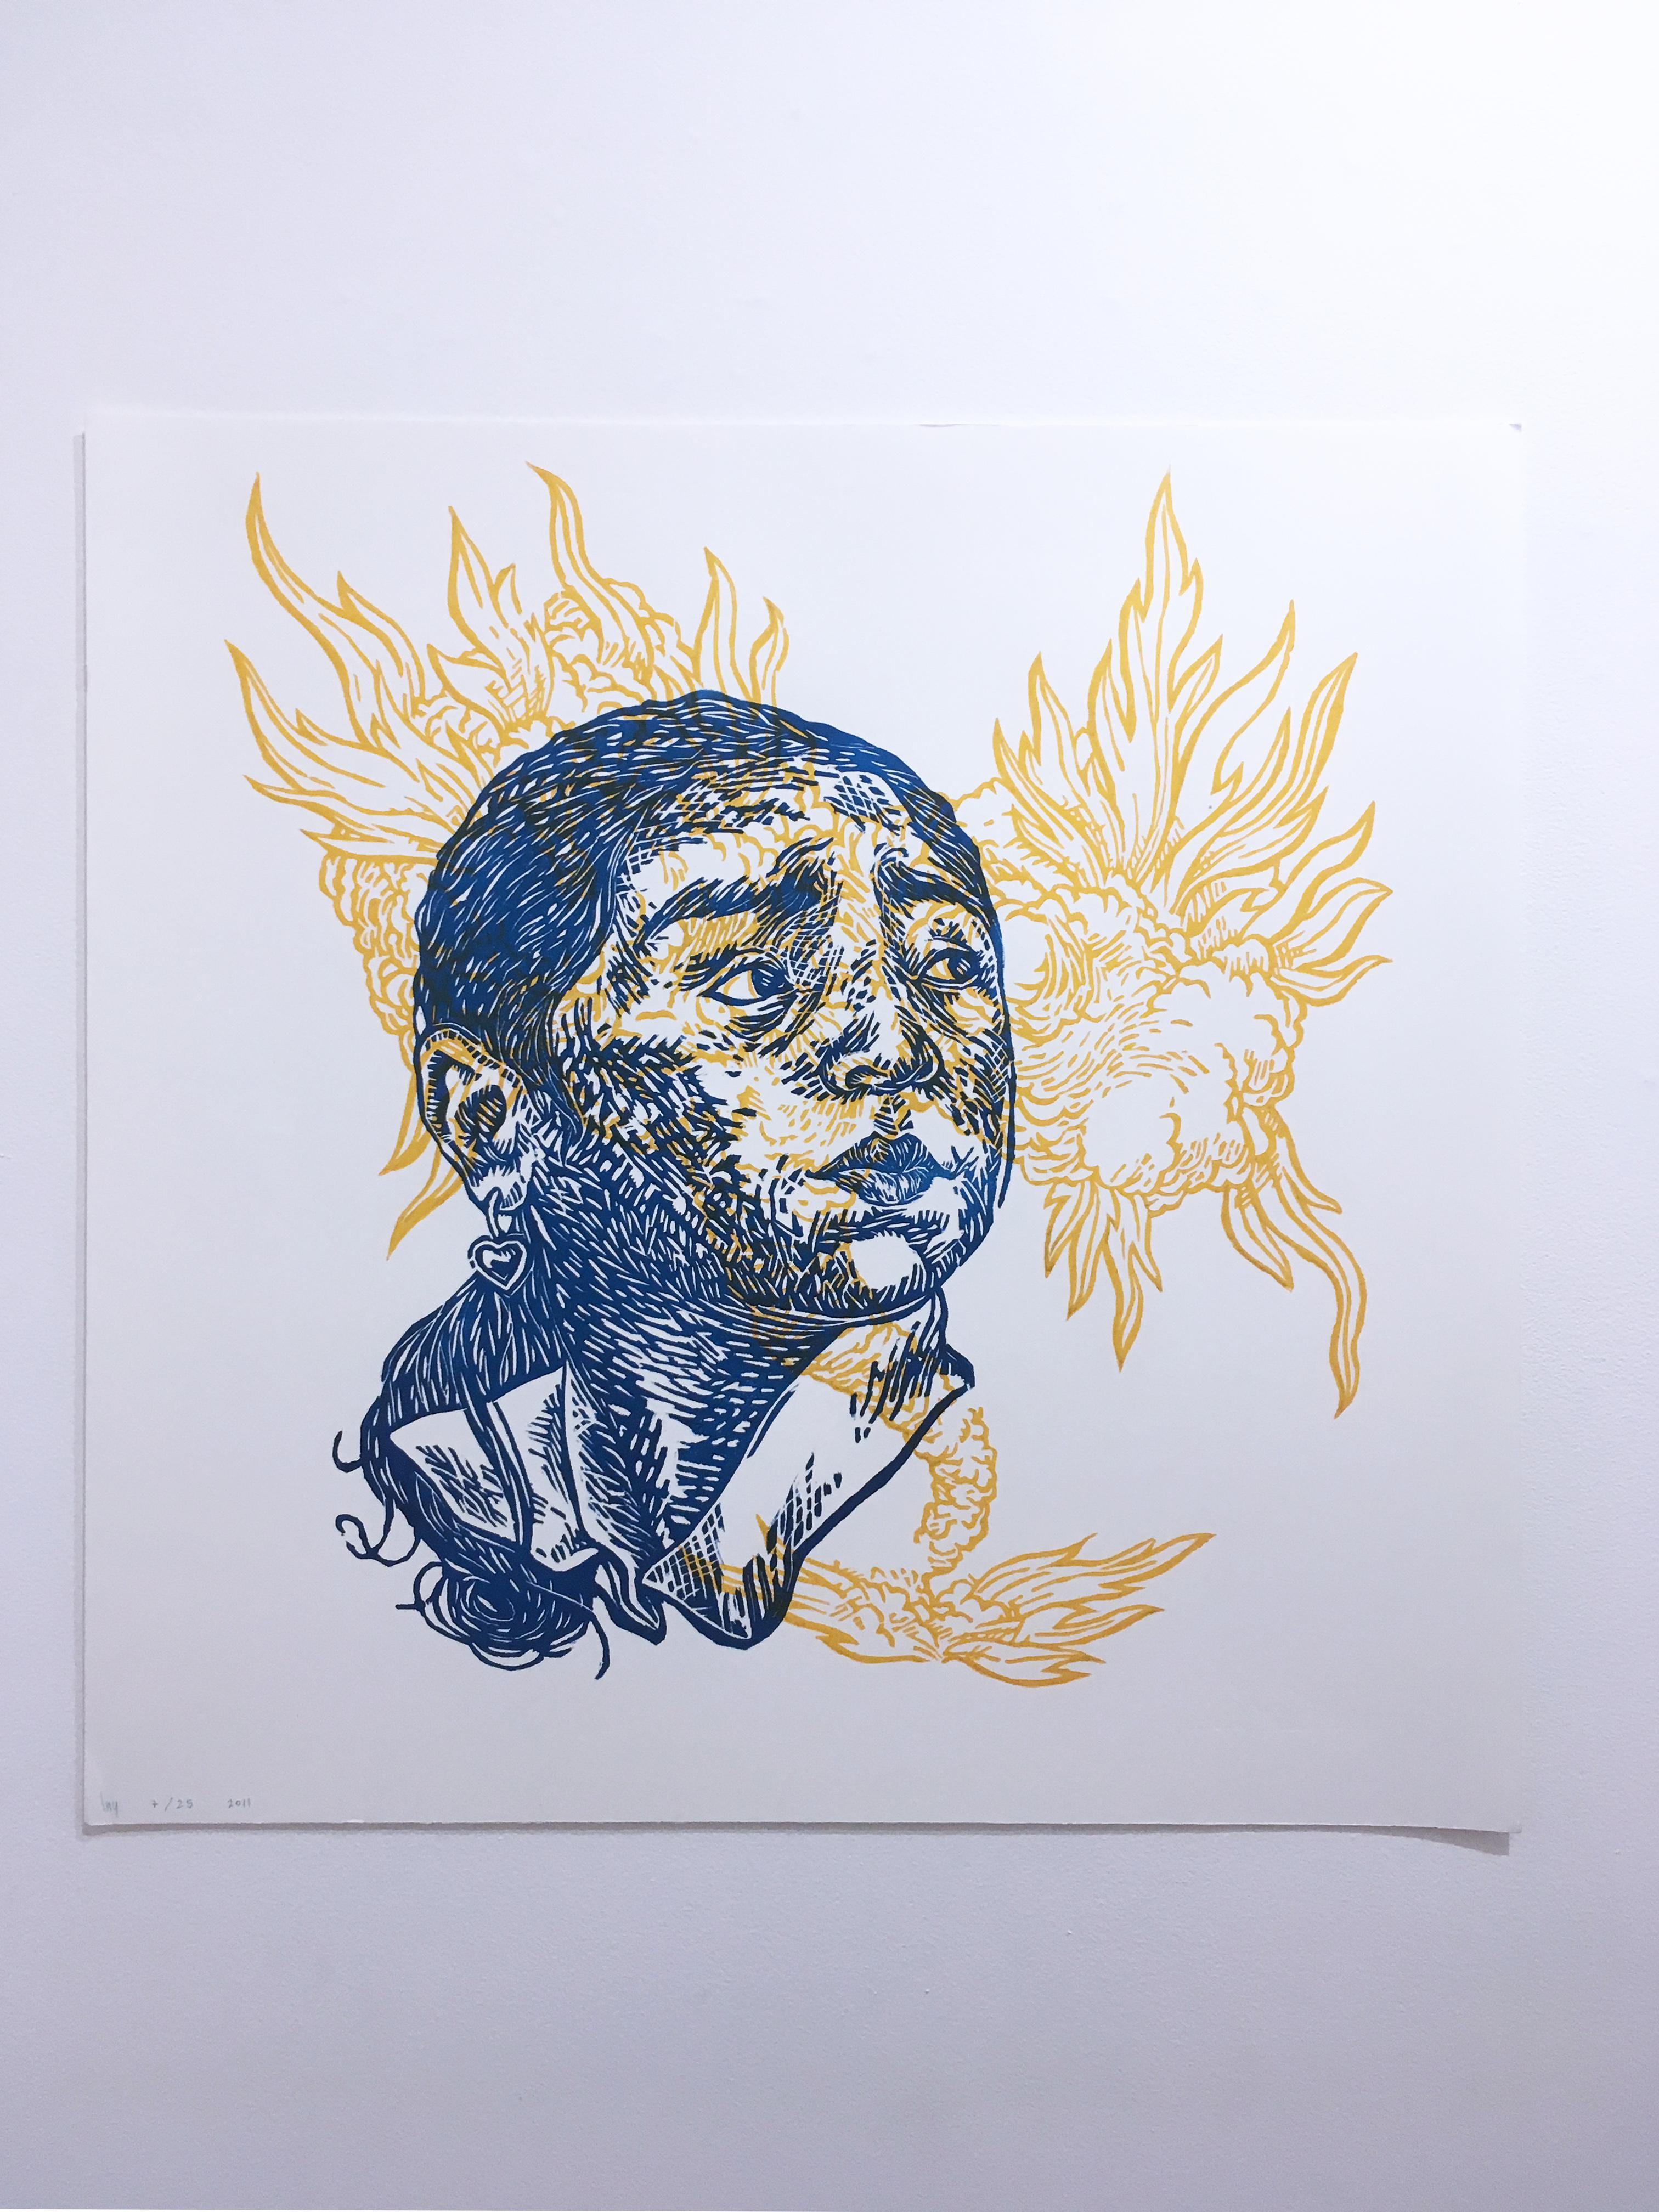 Parallax (blue), limited edition woodcut, blue, yellow, figurative, floral - Contemporary Print by Layqa Nuna Yawar